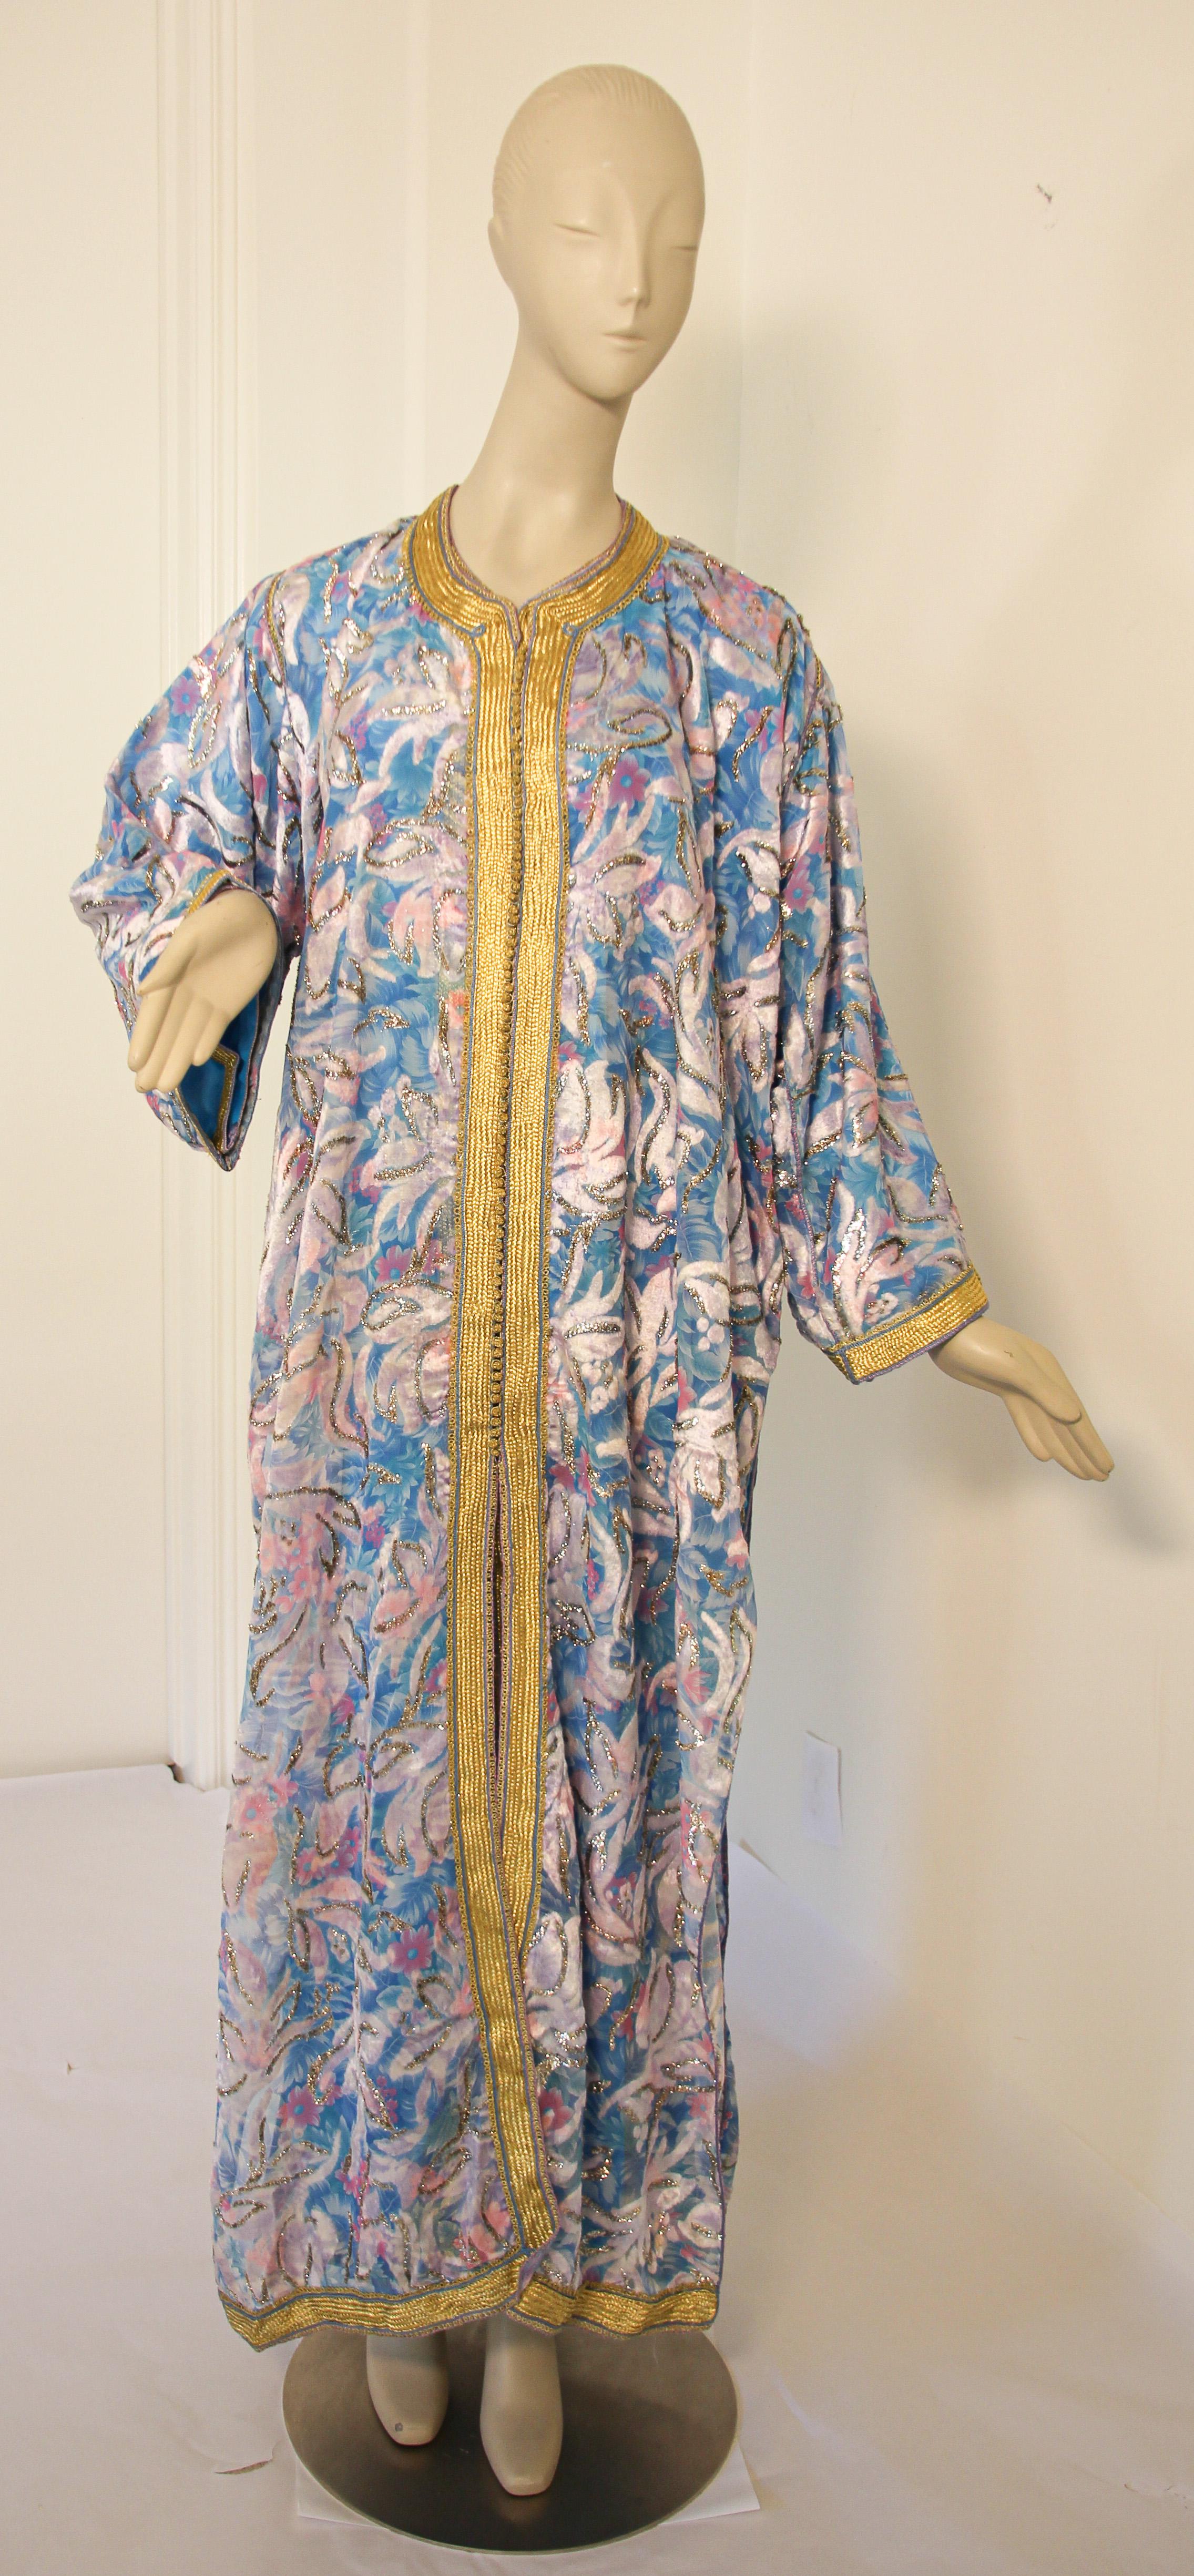 Elegant Moroccan caftan in turquoise and gold floral lame metallic and embroidered trim,
circa 1970s.
This long maxi dress kaftan is embroidered and embellished entirely by hand.
It’s crafted in Morocco and tailored for a relaxed fit.
One of a